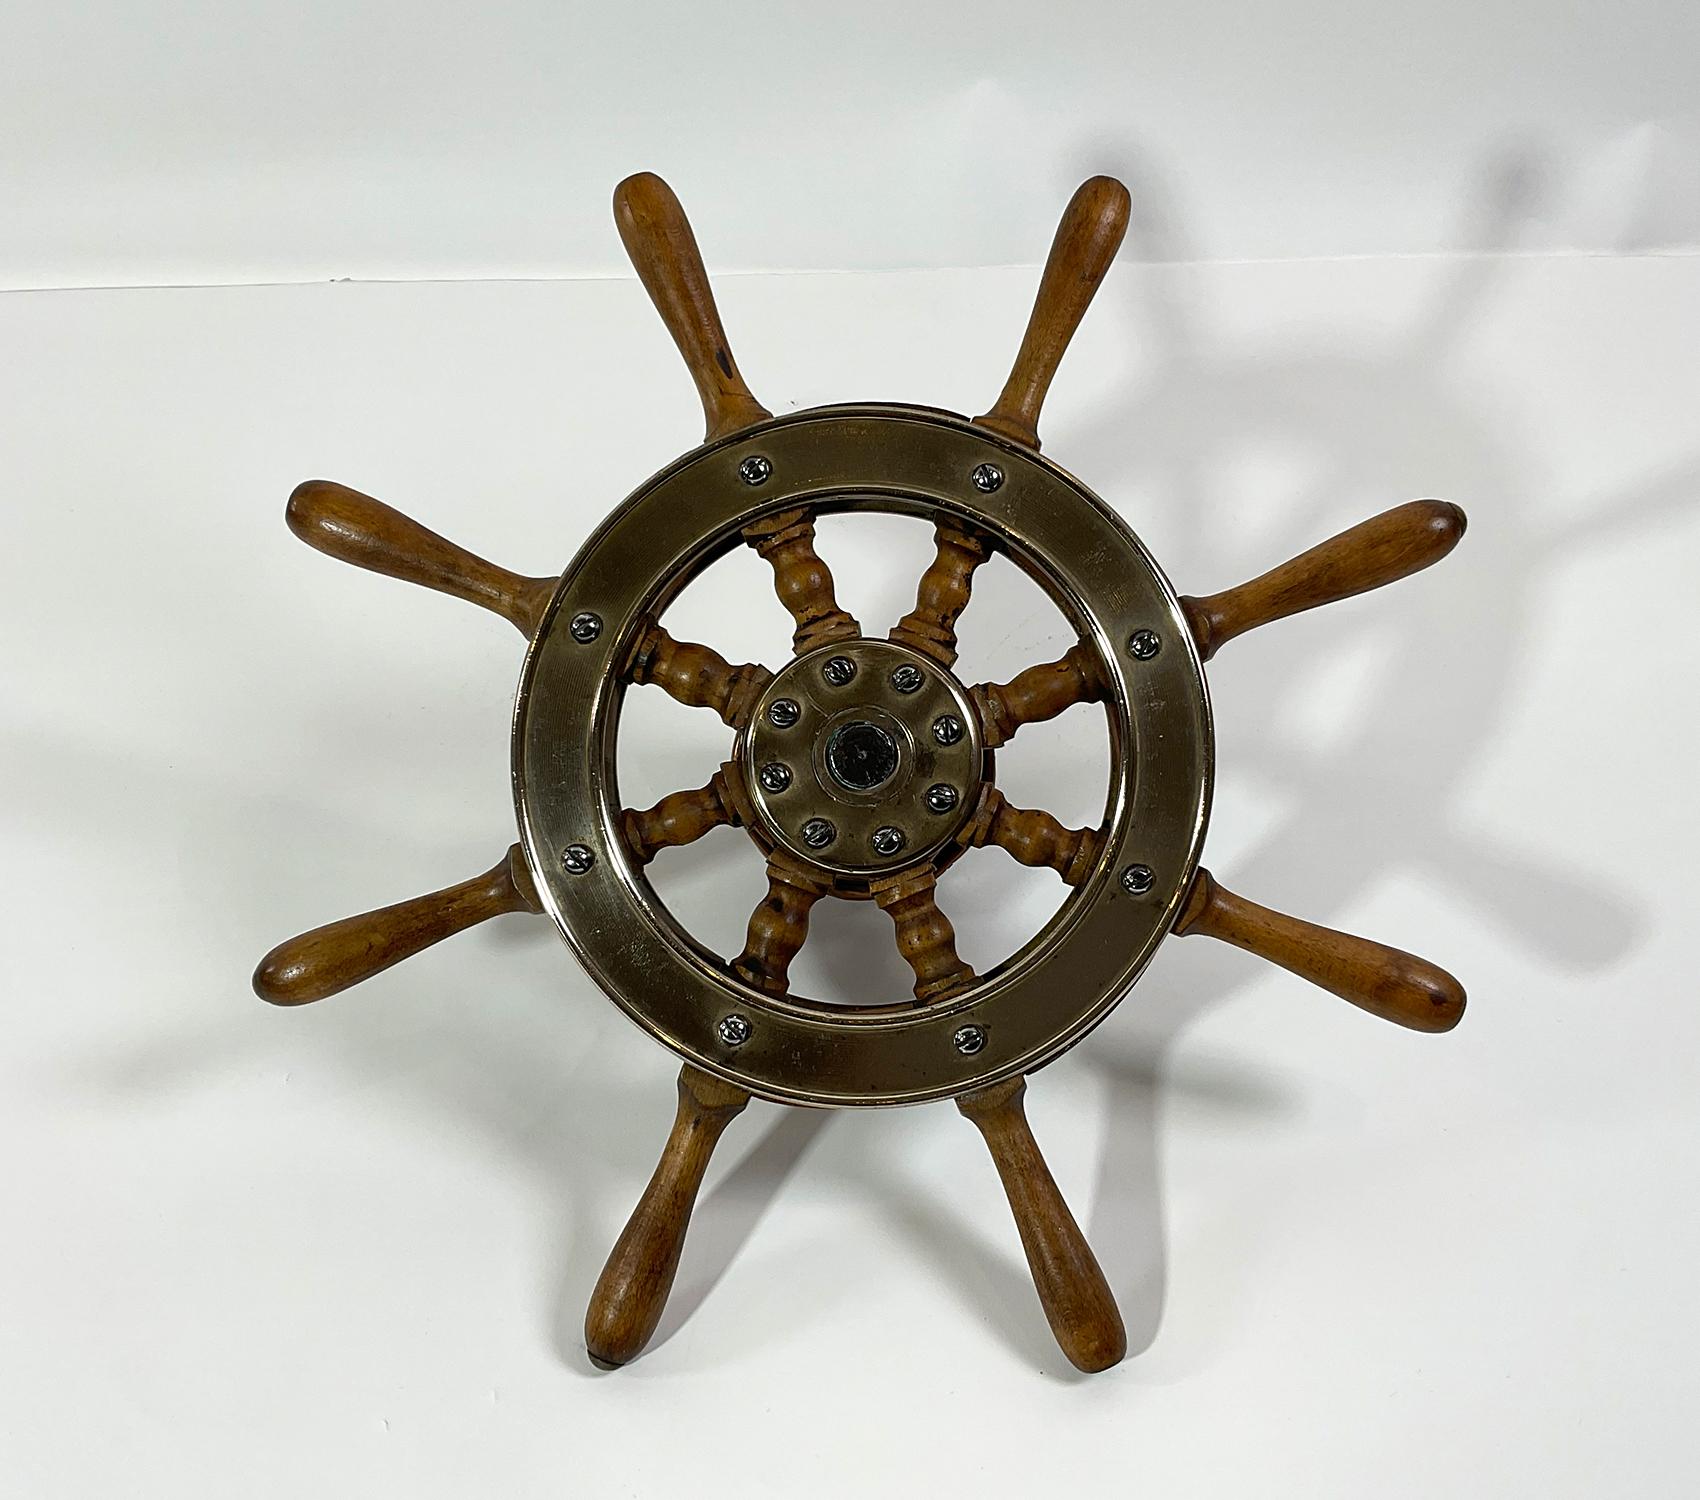 Small boat or yacht wheel of maple and brass. Wheel is fitted with a shaft and rudder pulley. Very decorative and authentic maritime relic. Circa 1920. Measure: 15 inch.